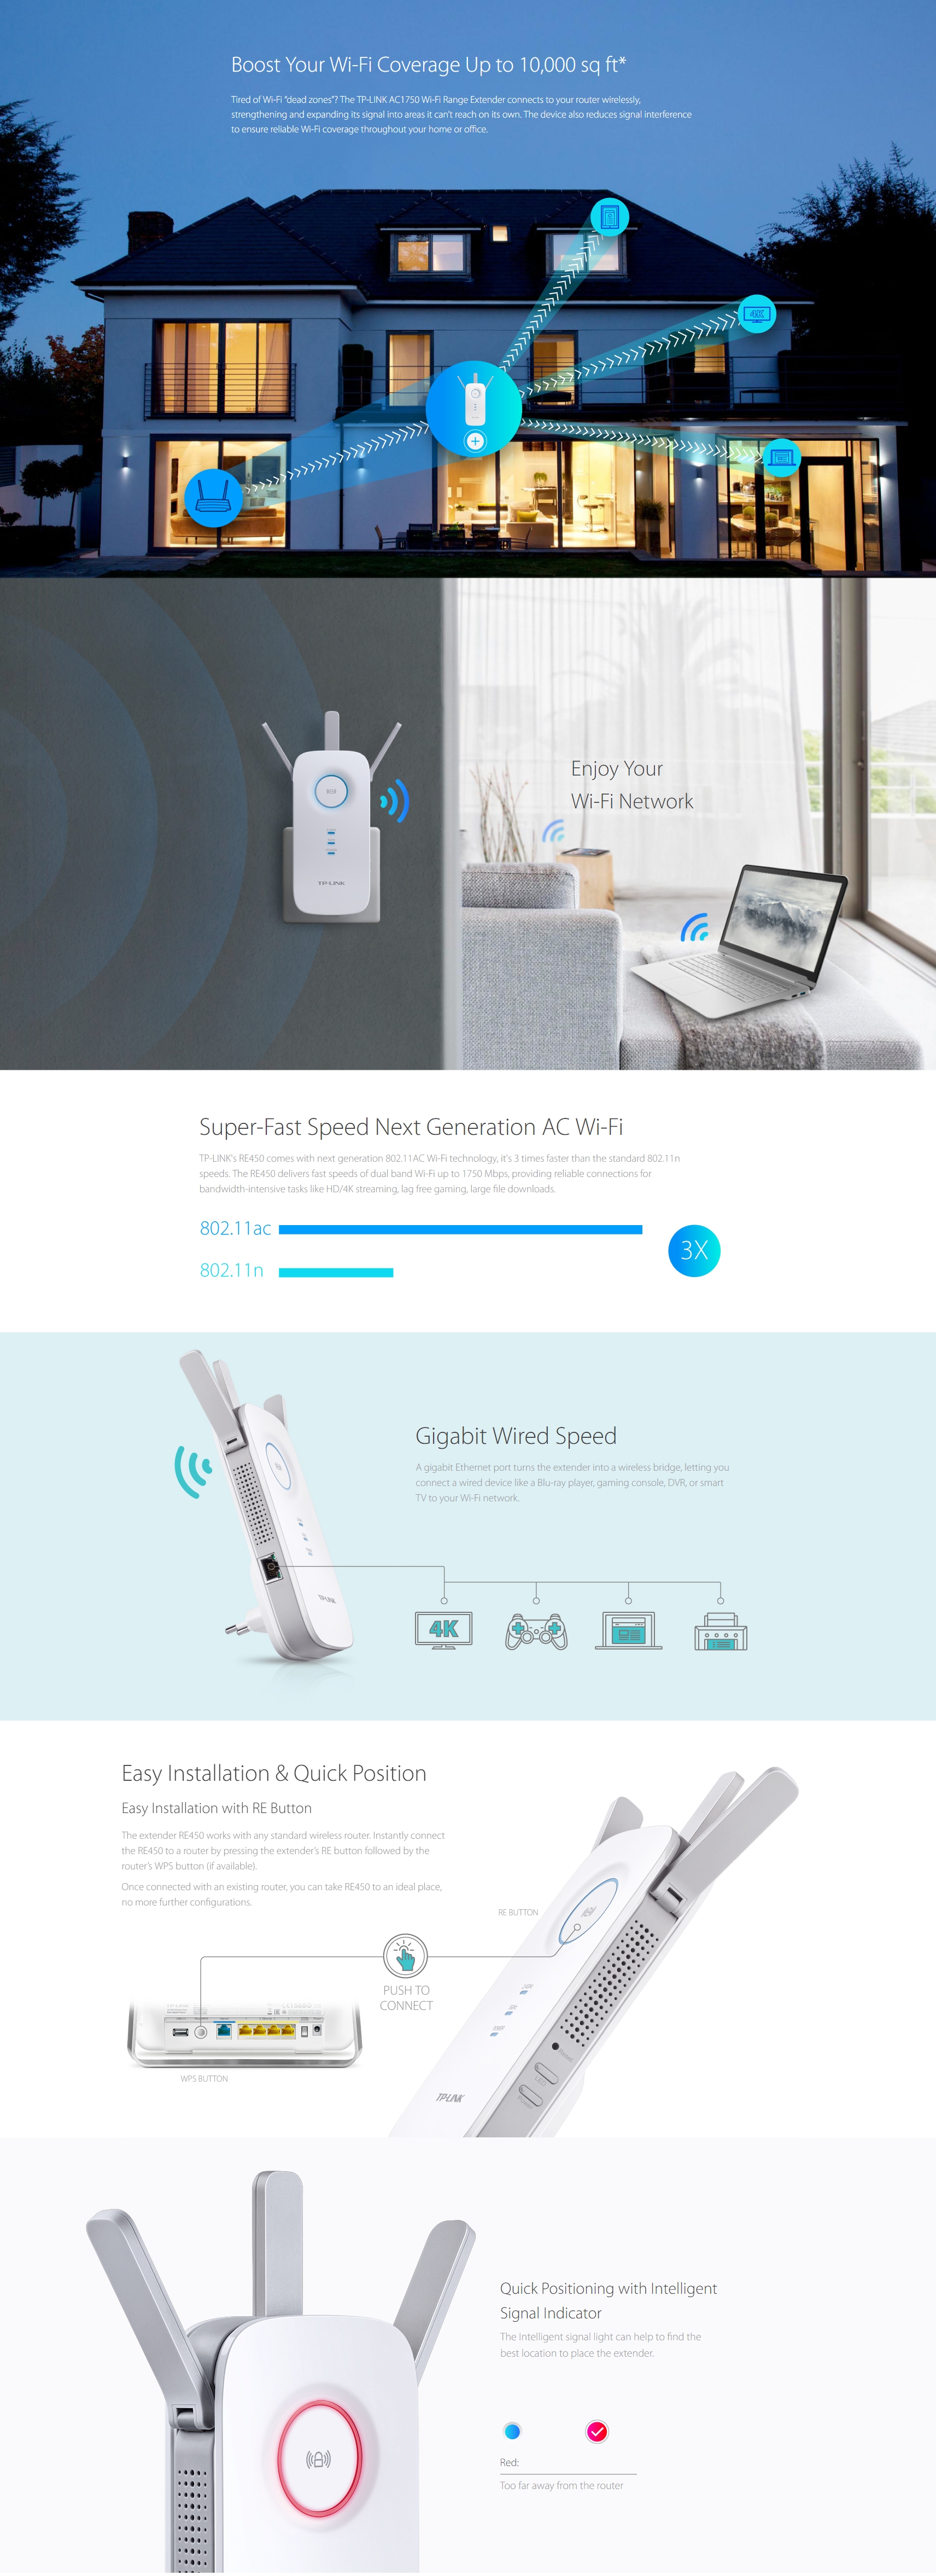 A large marketing image providing additional information about the product TP-Link RE450 - AC1750 Wi-Fi 5 Range Extender - Additional alt info not provided